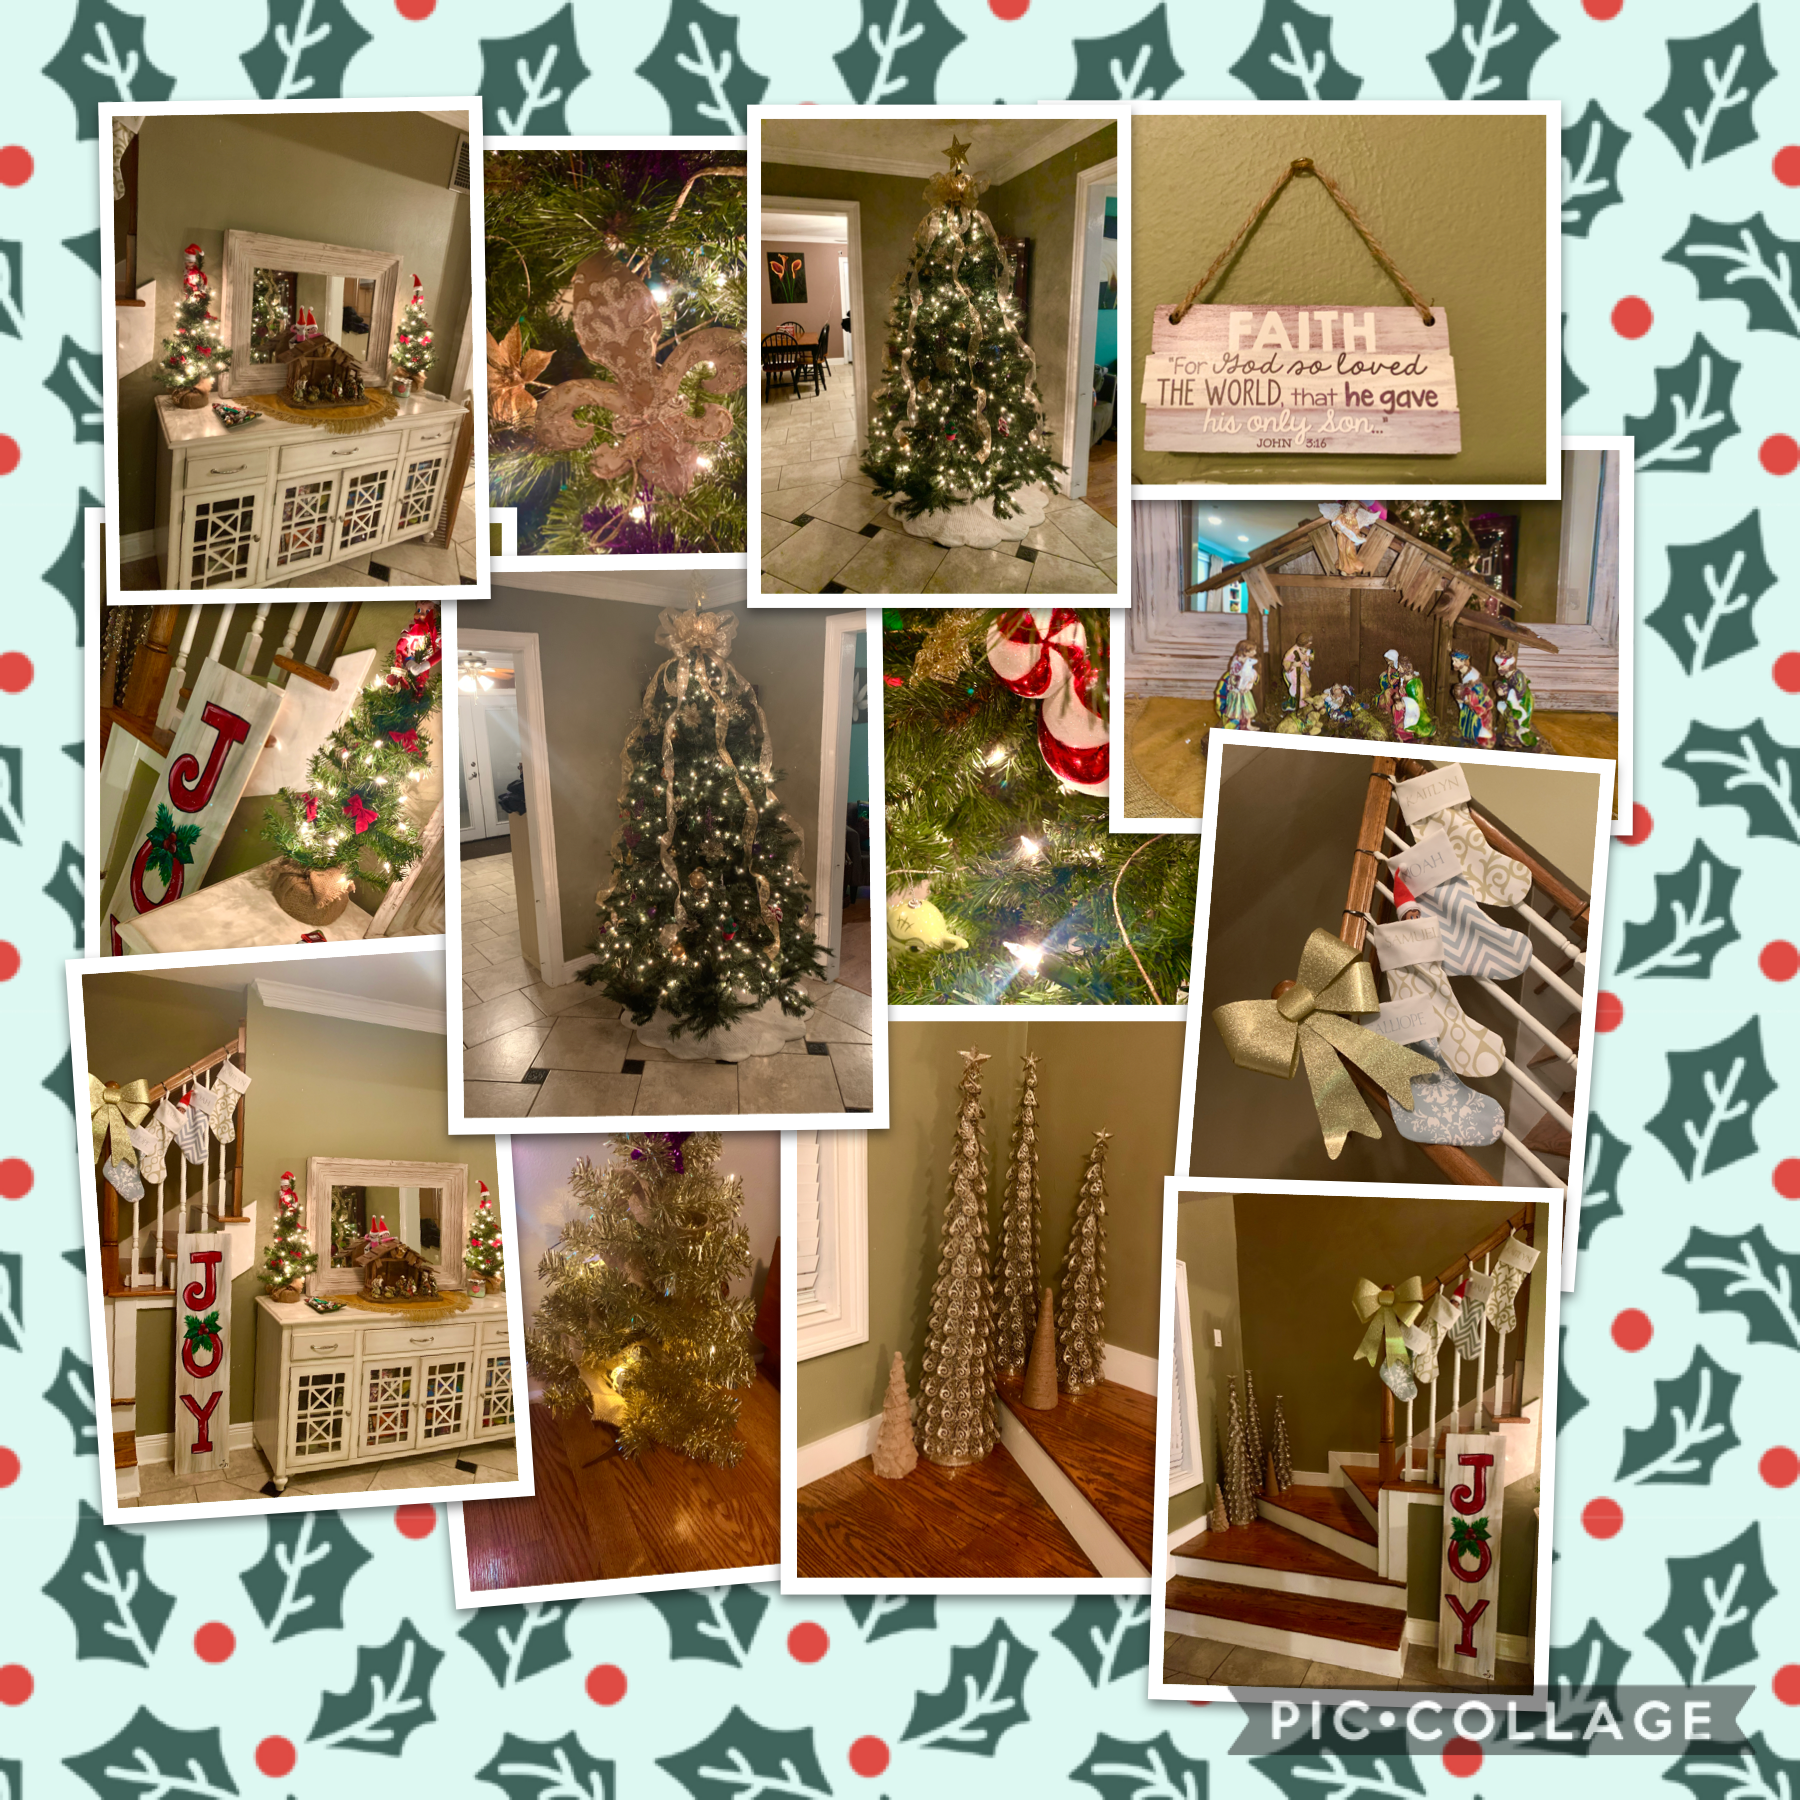 here are some of the decorations in my house!! I edited them lol and I will have my room being redone so I’ll post those pictures to THE BEFORE AND AFTER!!!